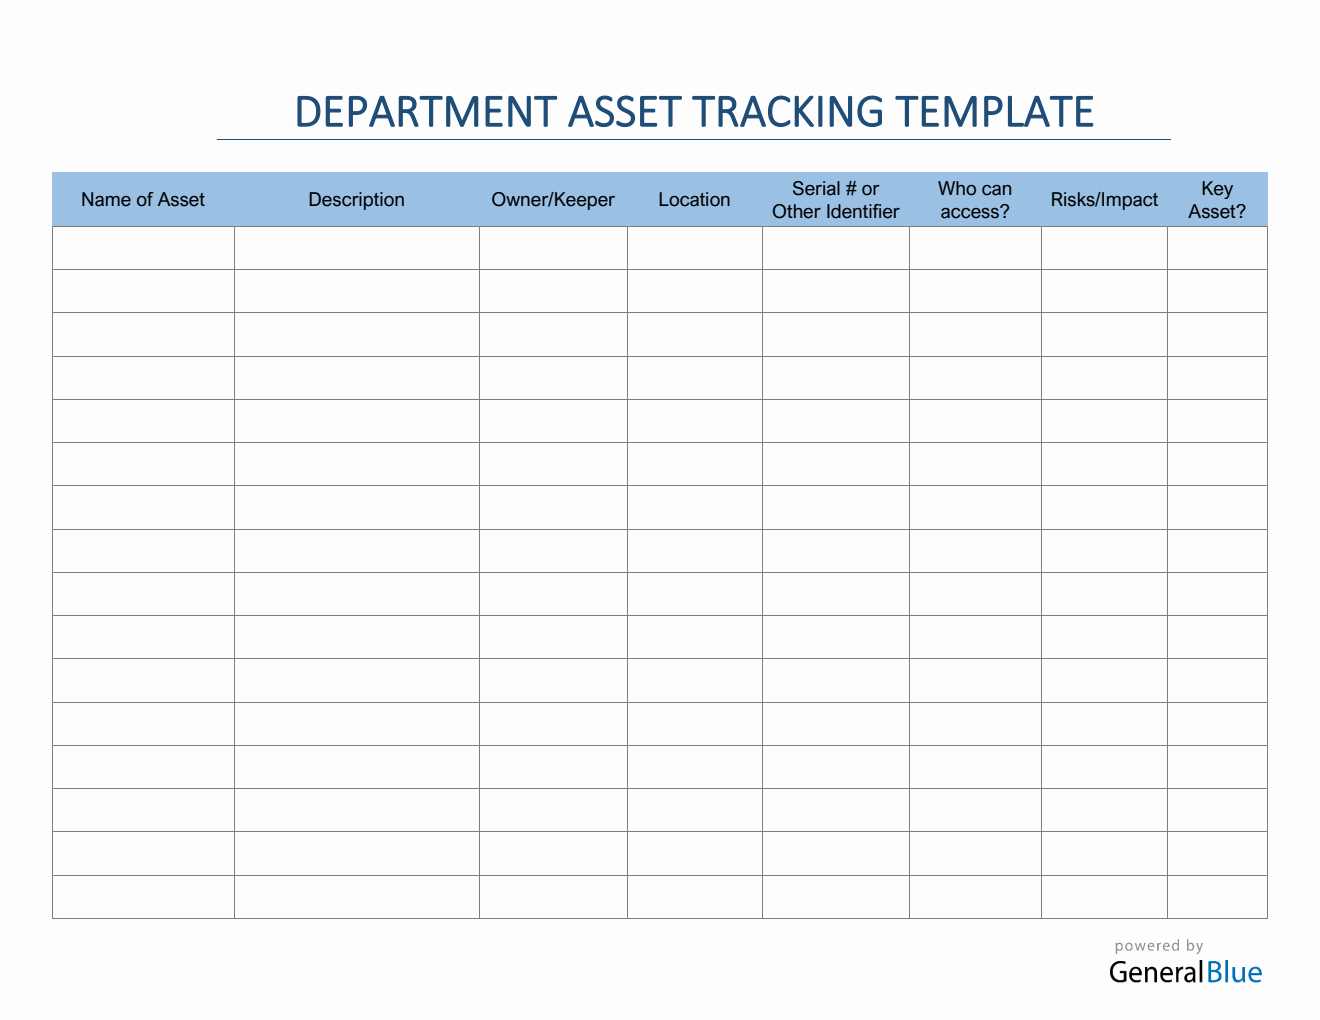 Department Asset Tracking Template in PDF